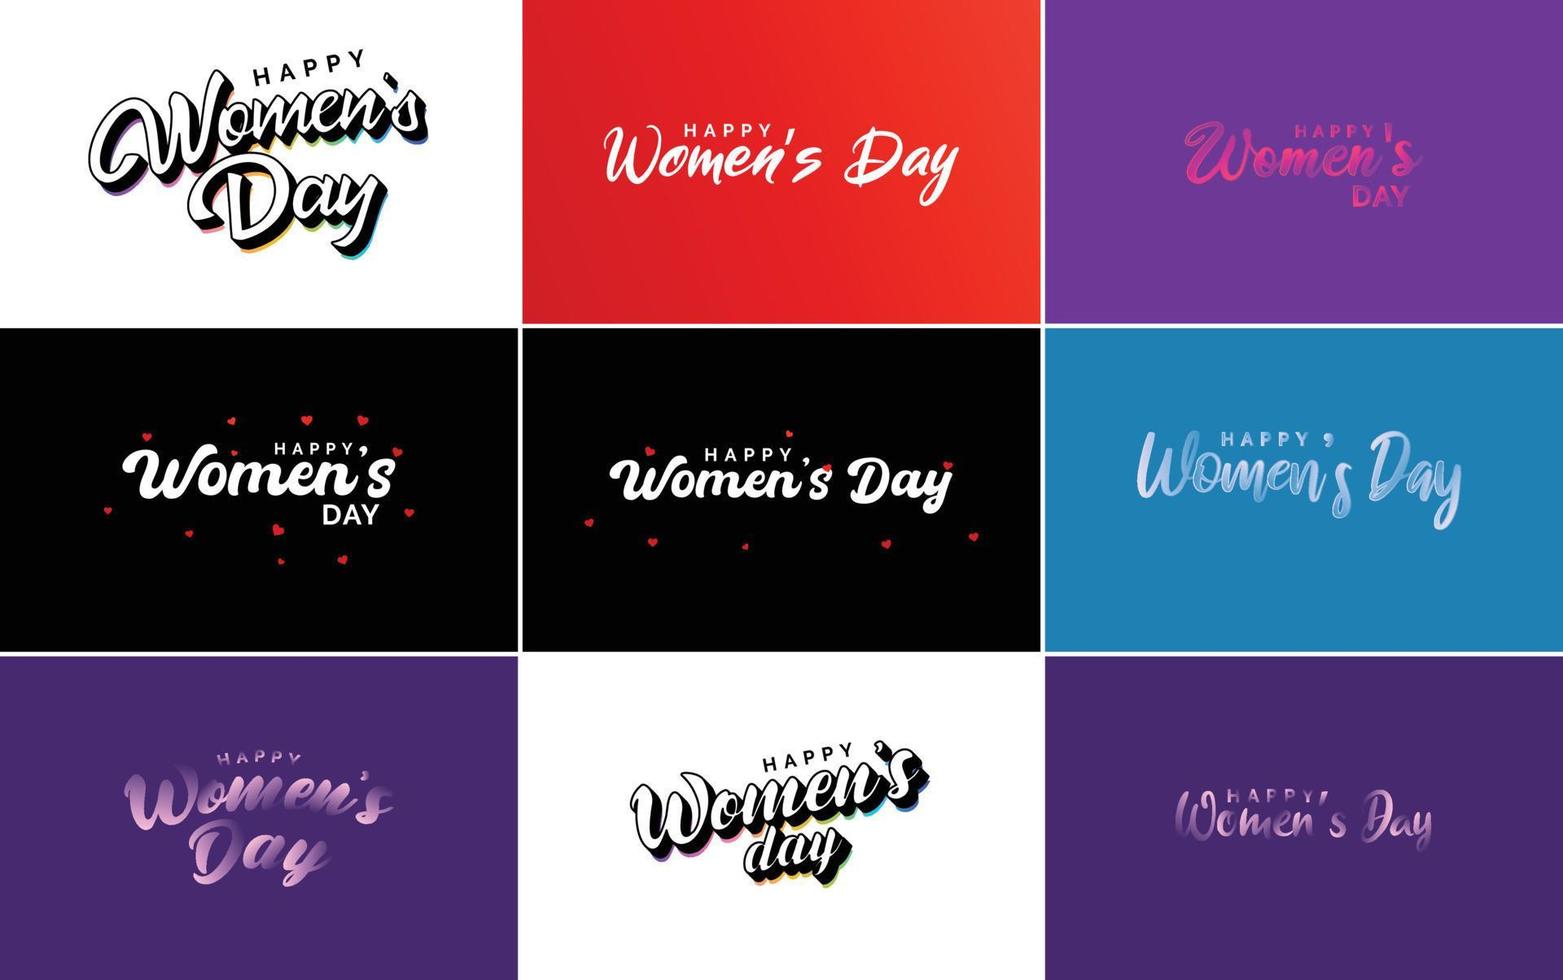 Happy Women's Day logo set with a heart vector design